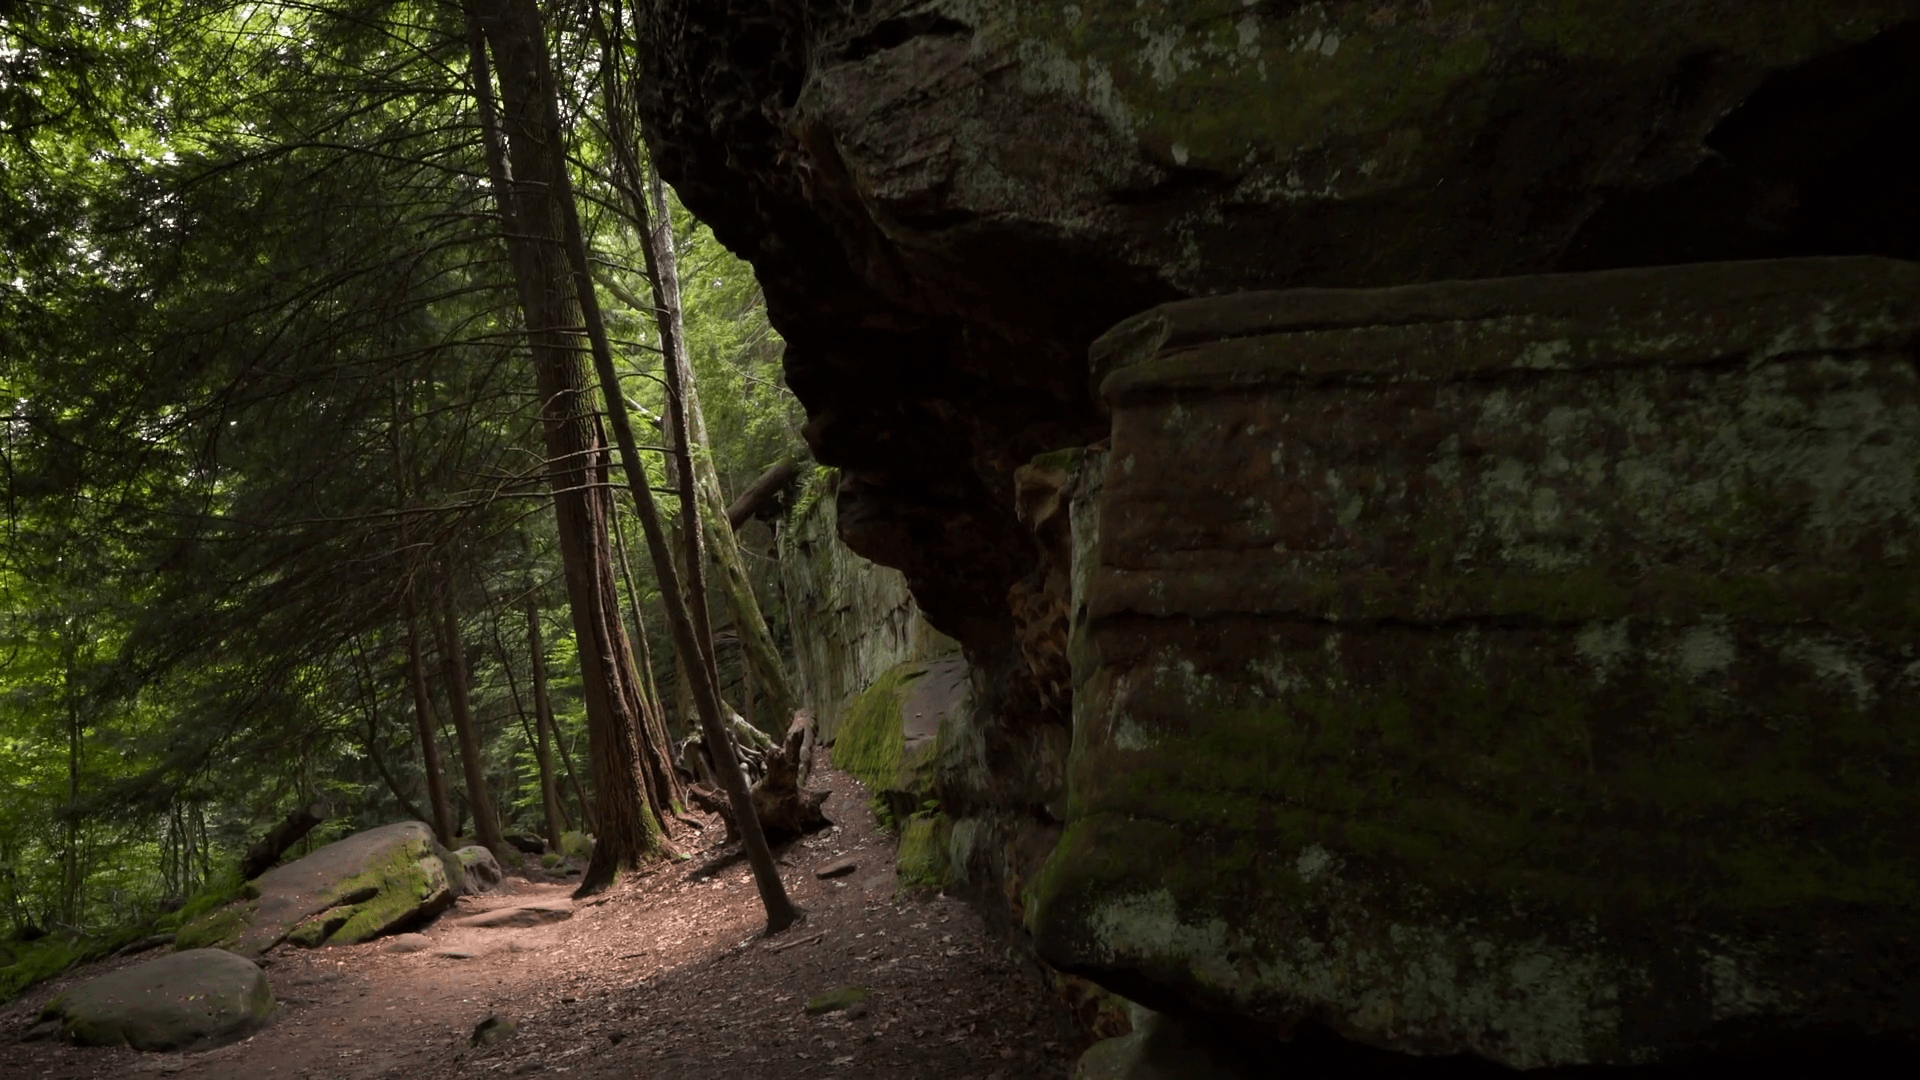 Stabilized hike in the forest at Cuyahoga Valley National Park